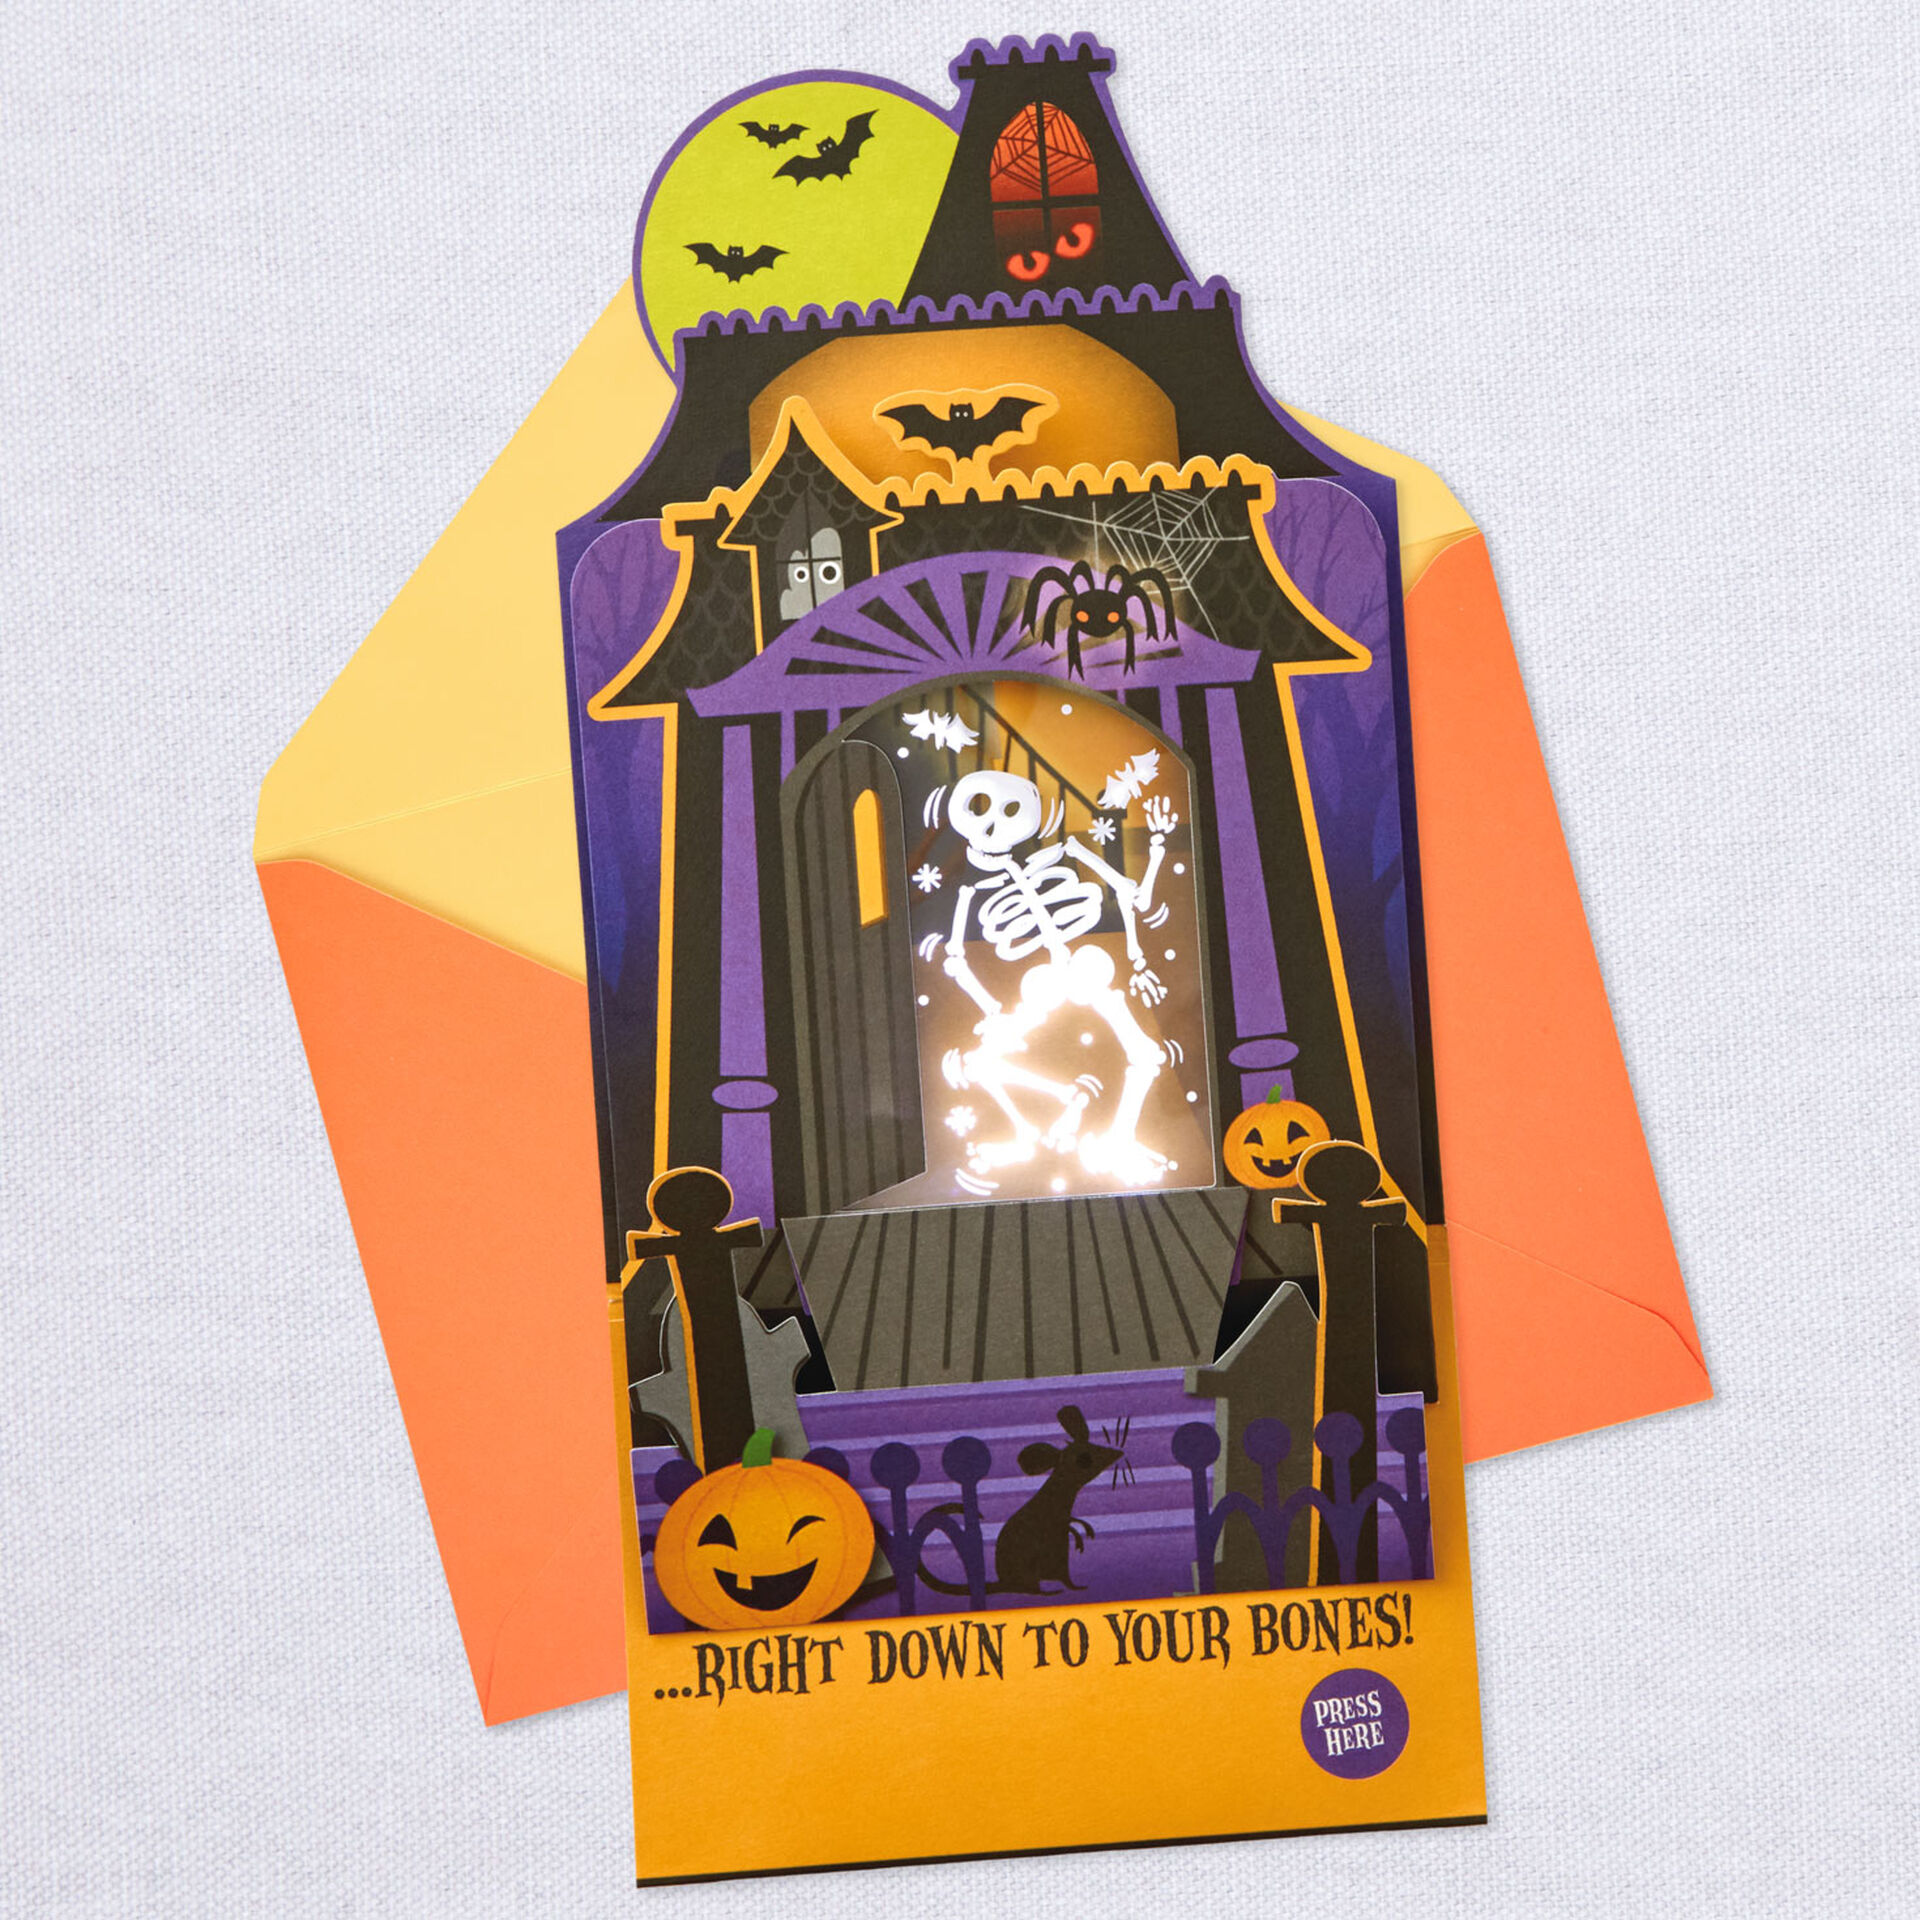 Dancing Skeleton Pop-Up Musical Halloween Card With Light - Greeting